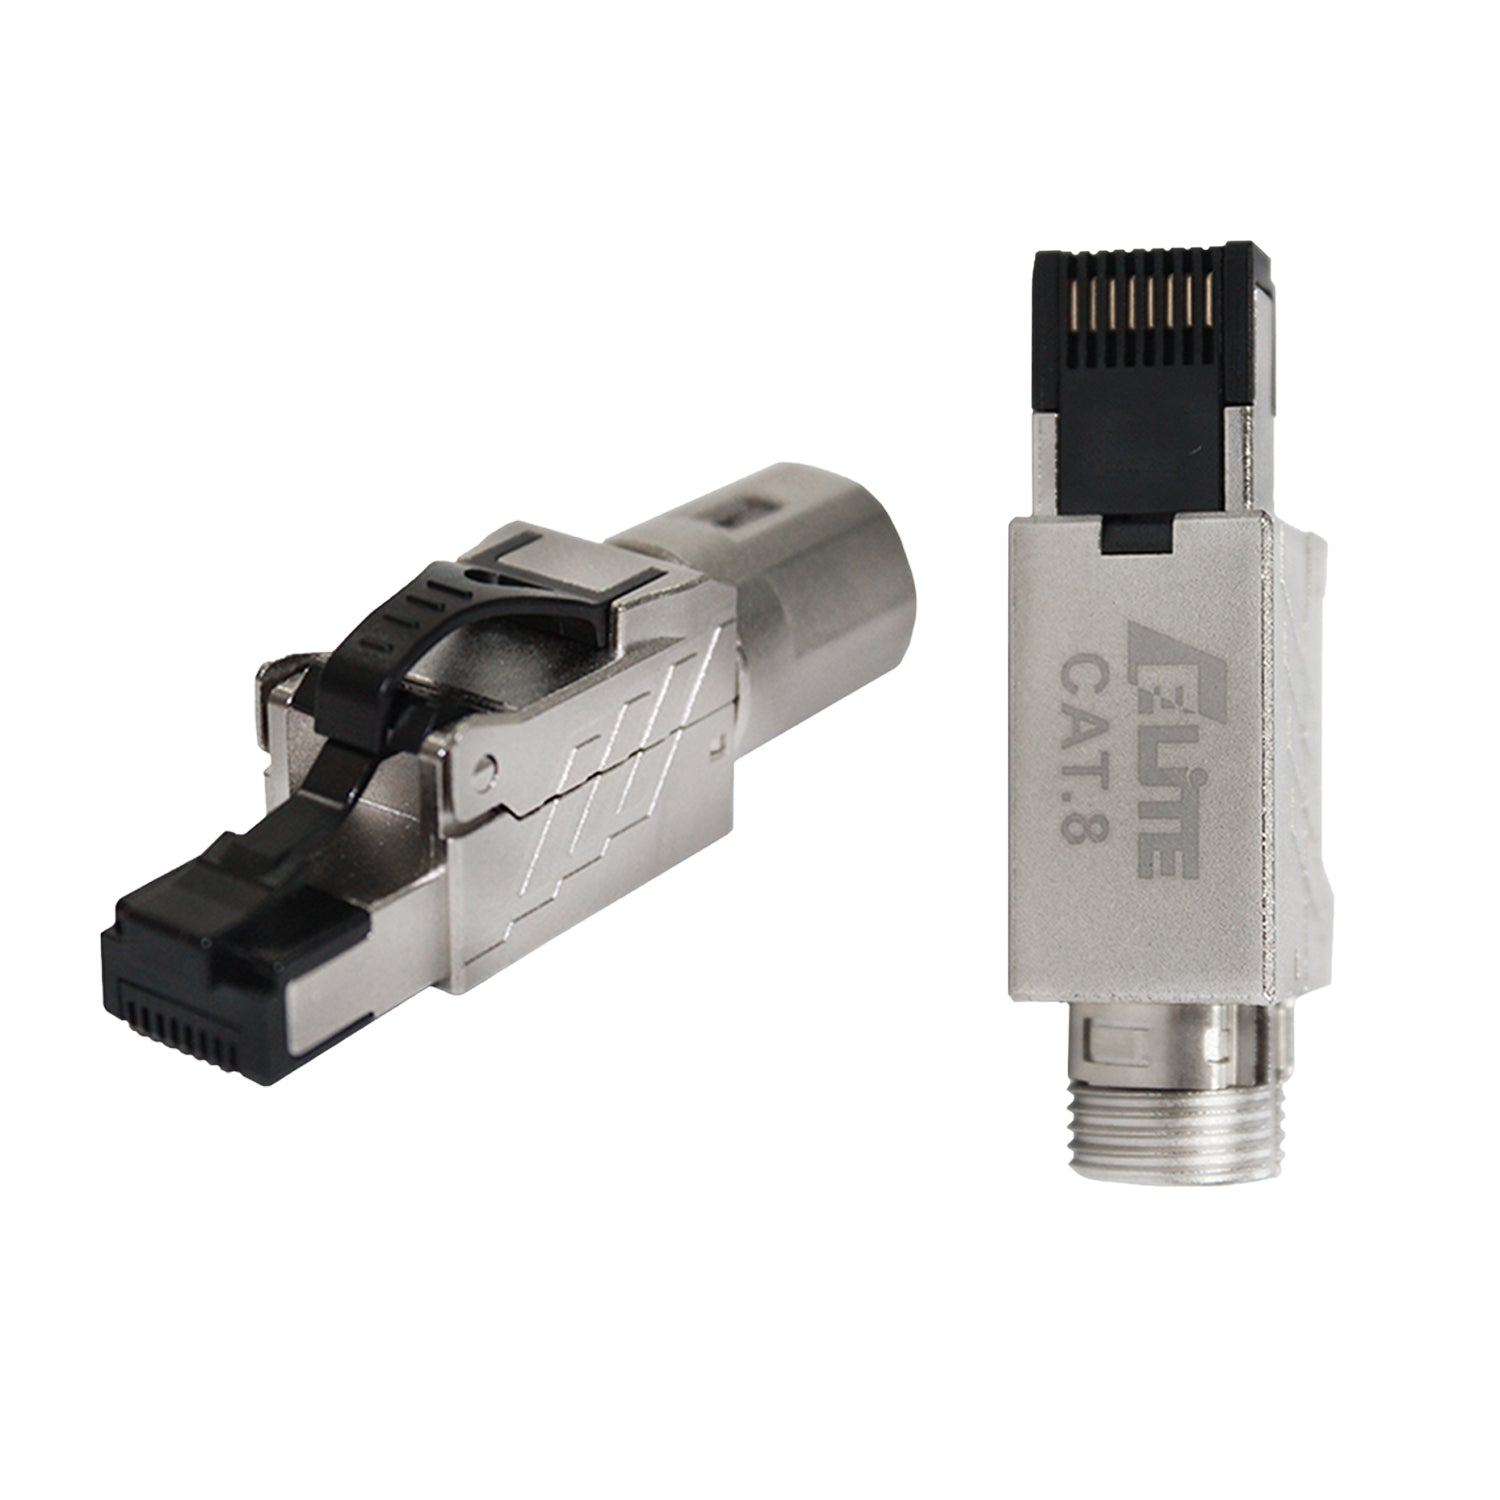 RJ45 Cat.8 Plugs, RJ45 Connectors: Enhancing Network Integrity and  Performance for Professionals